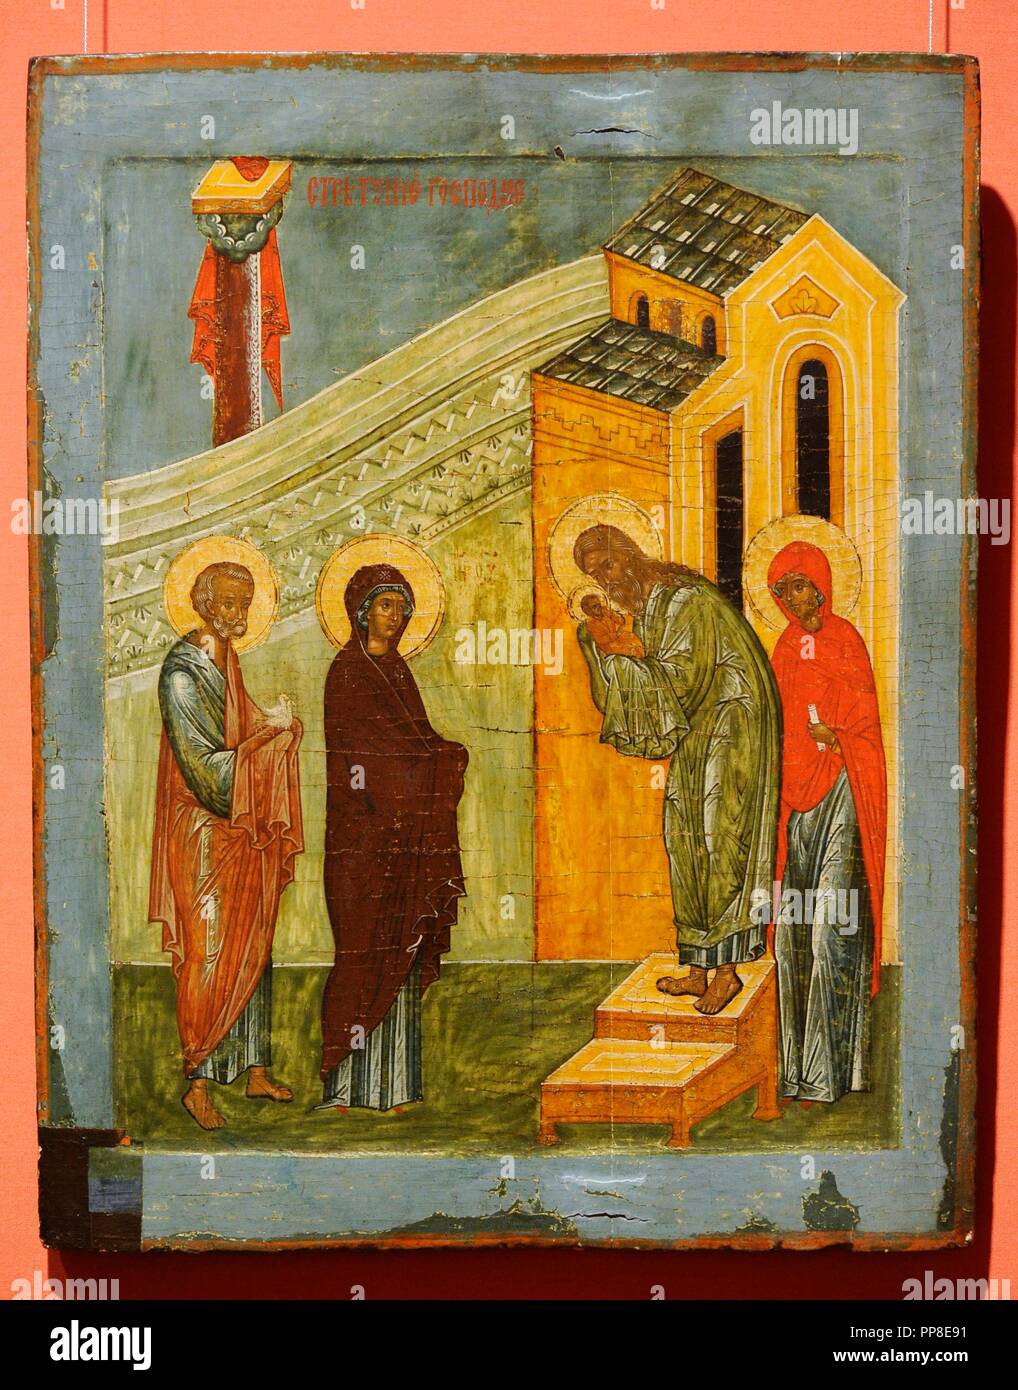 The Presentation of Christ in the Temple. Russian Icon. Novgorod School. First half of 16th century. National Gallery. Oslo. Norway. Stock Photo